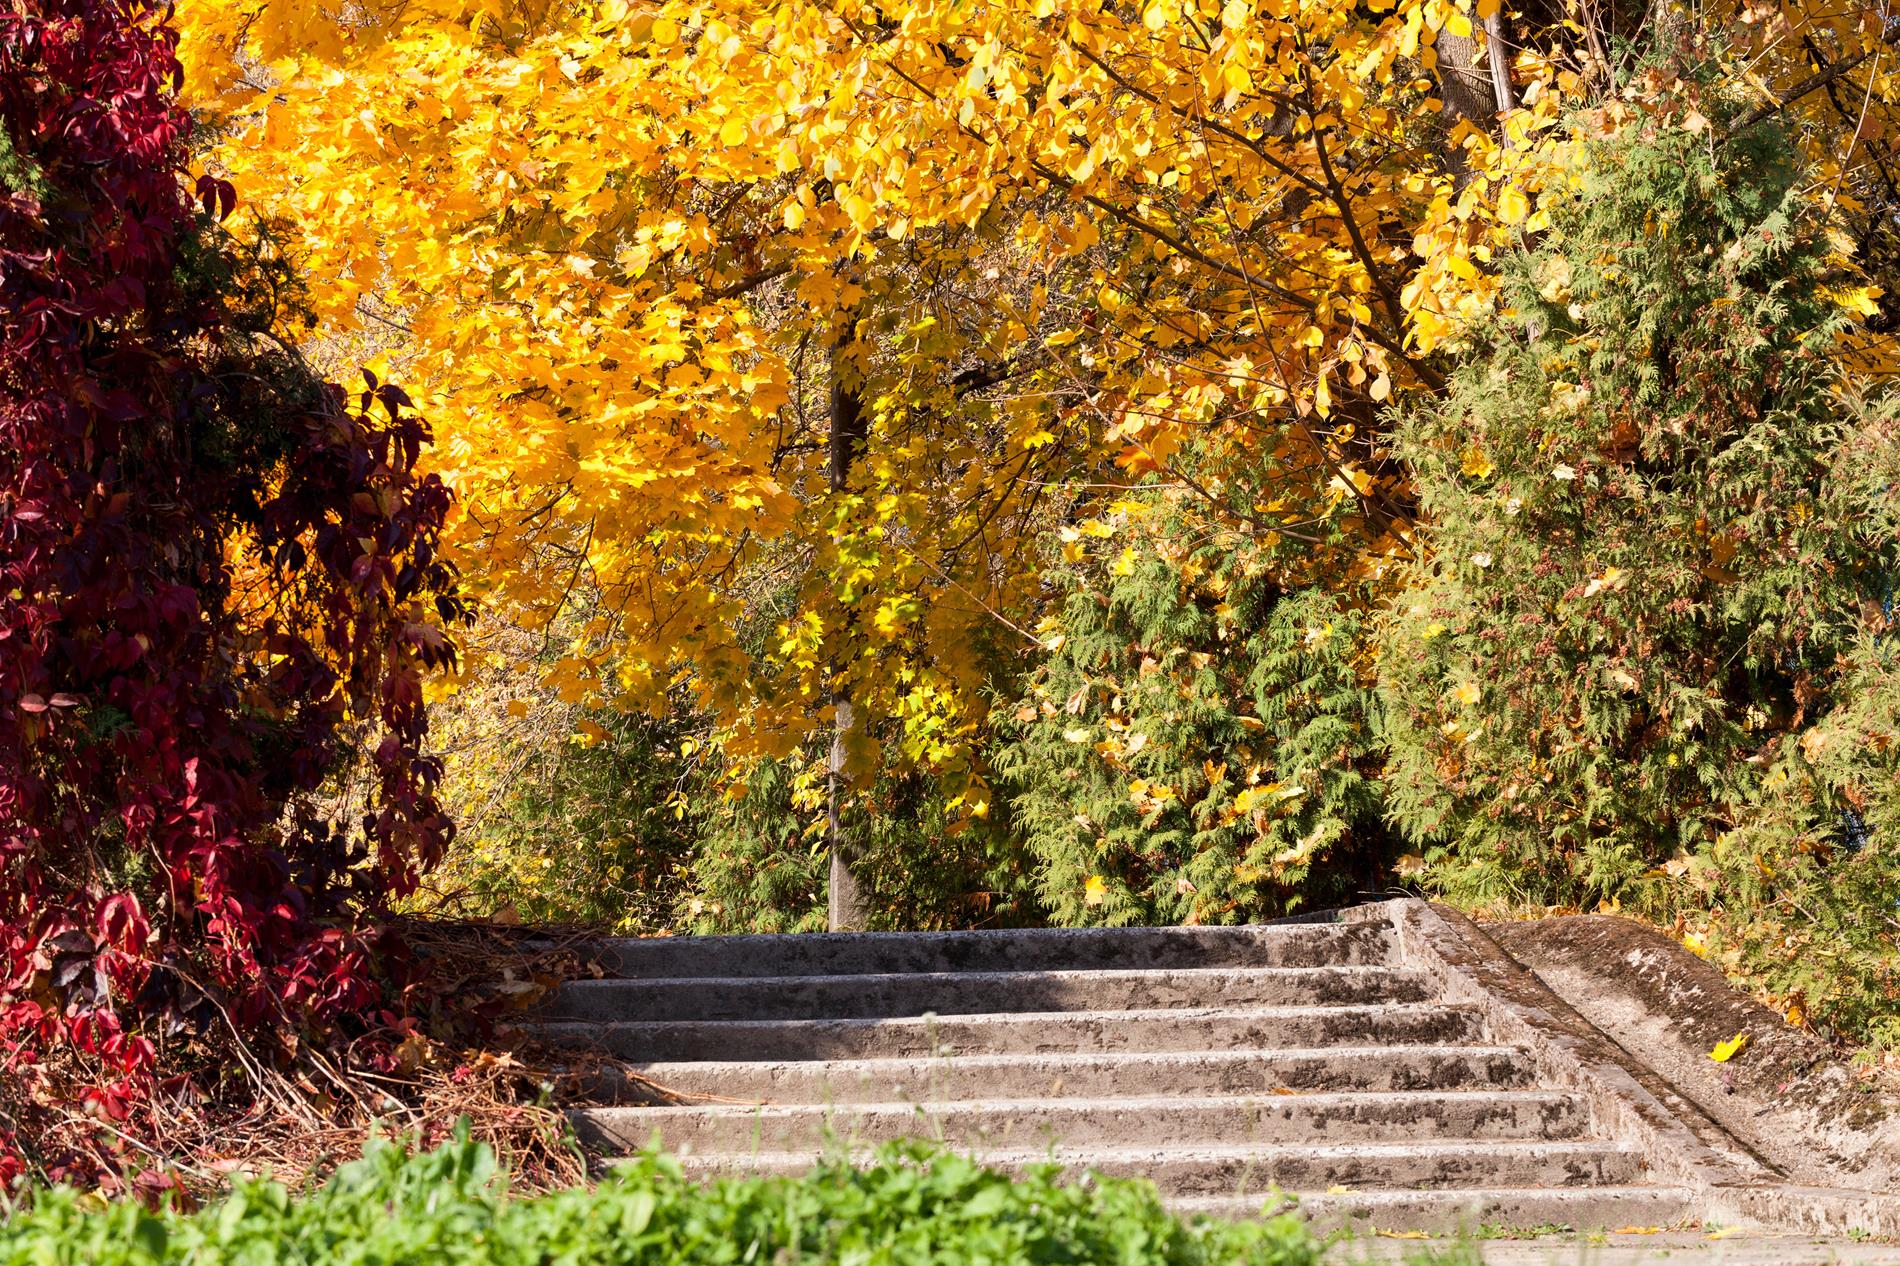 Stepping Stones Stairway to Autumn Colors